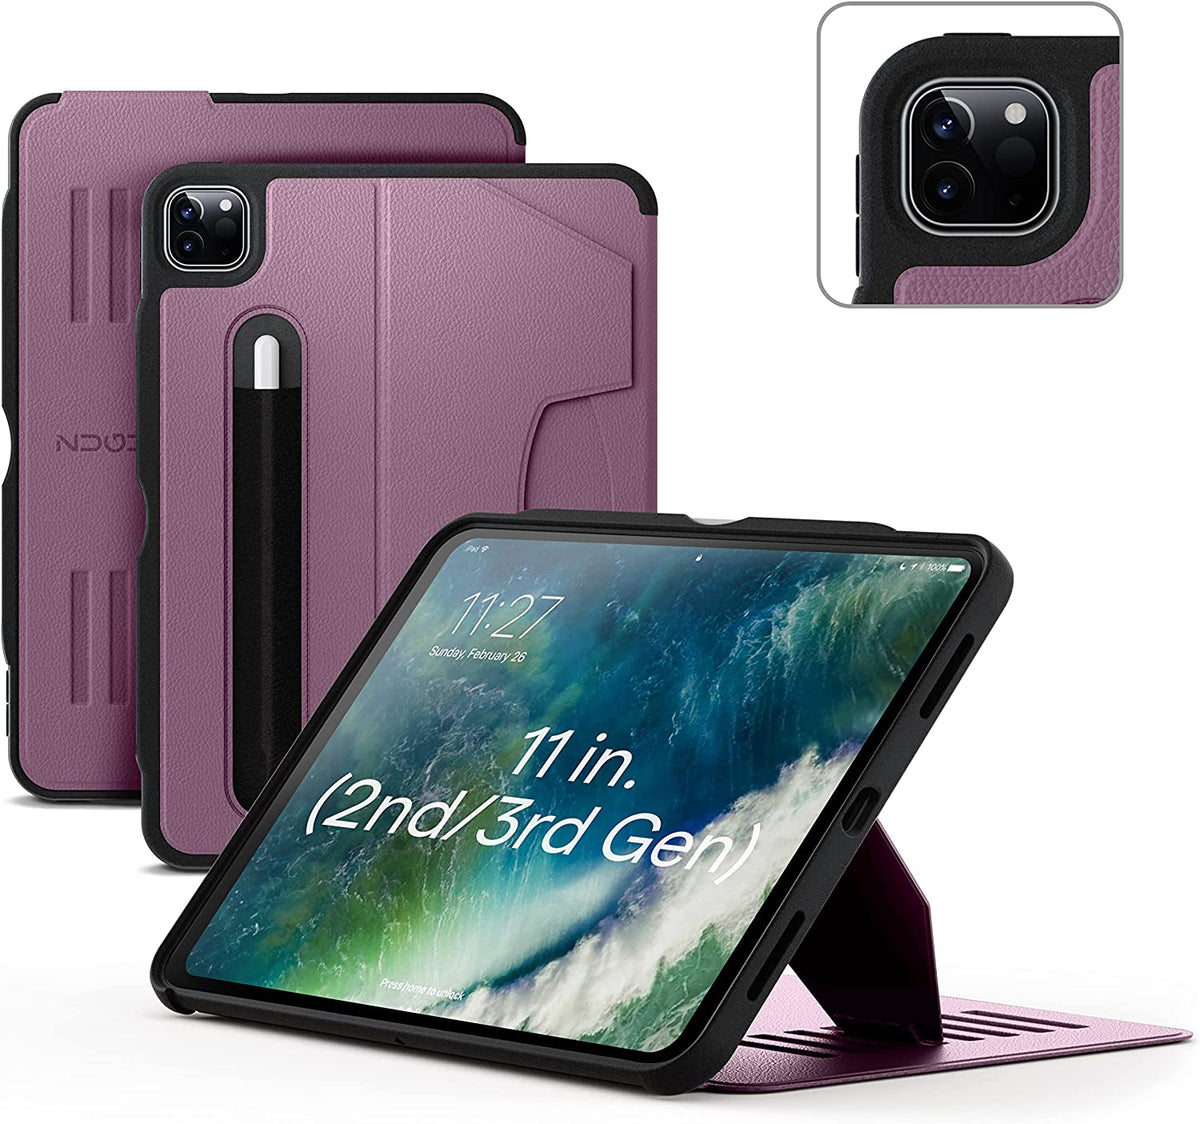 Magnetic Folio Case for iPad Air 4th, 5th and iPad Pro 1st Gen